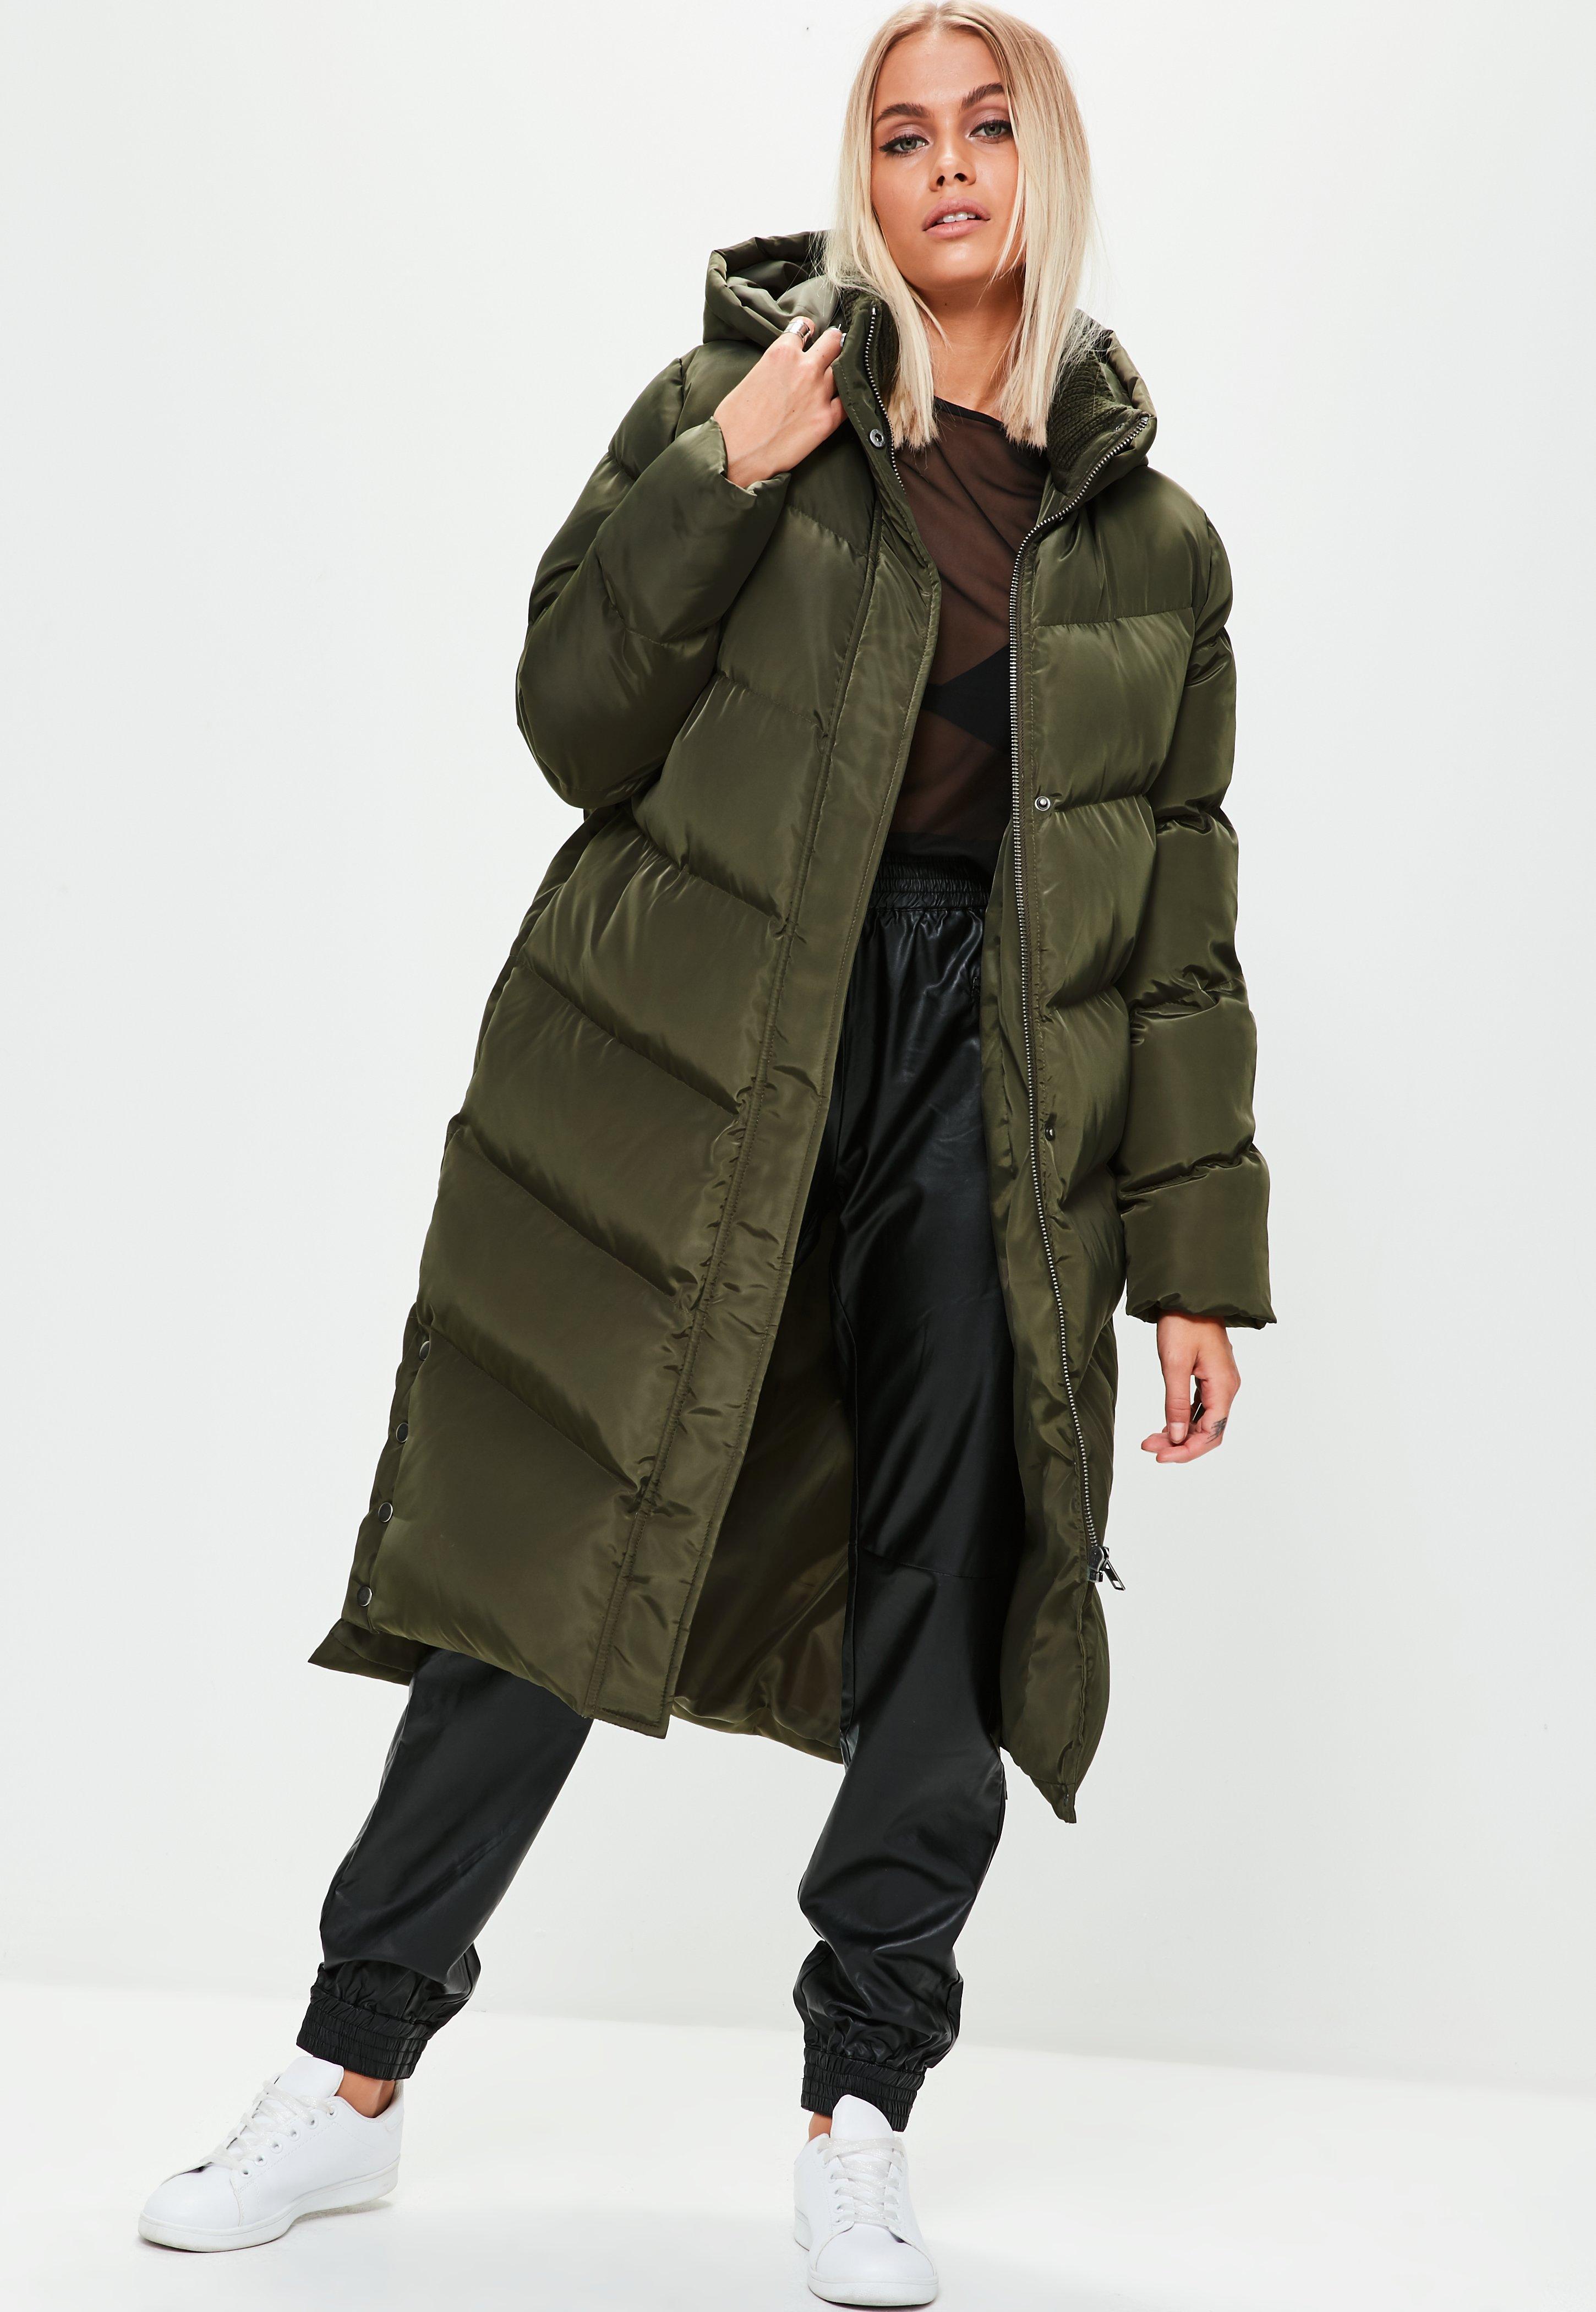 Winter fashion with puffer coat